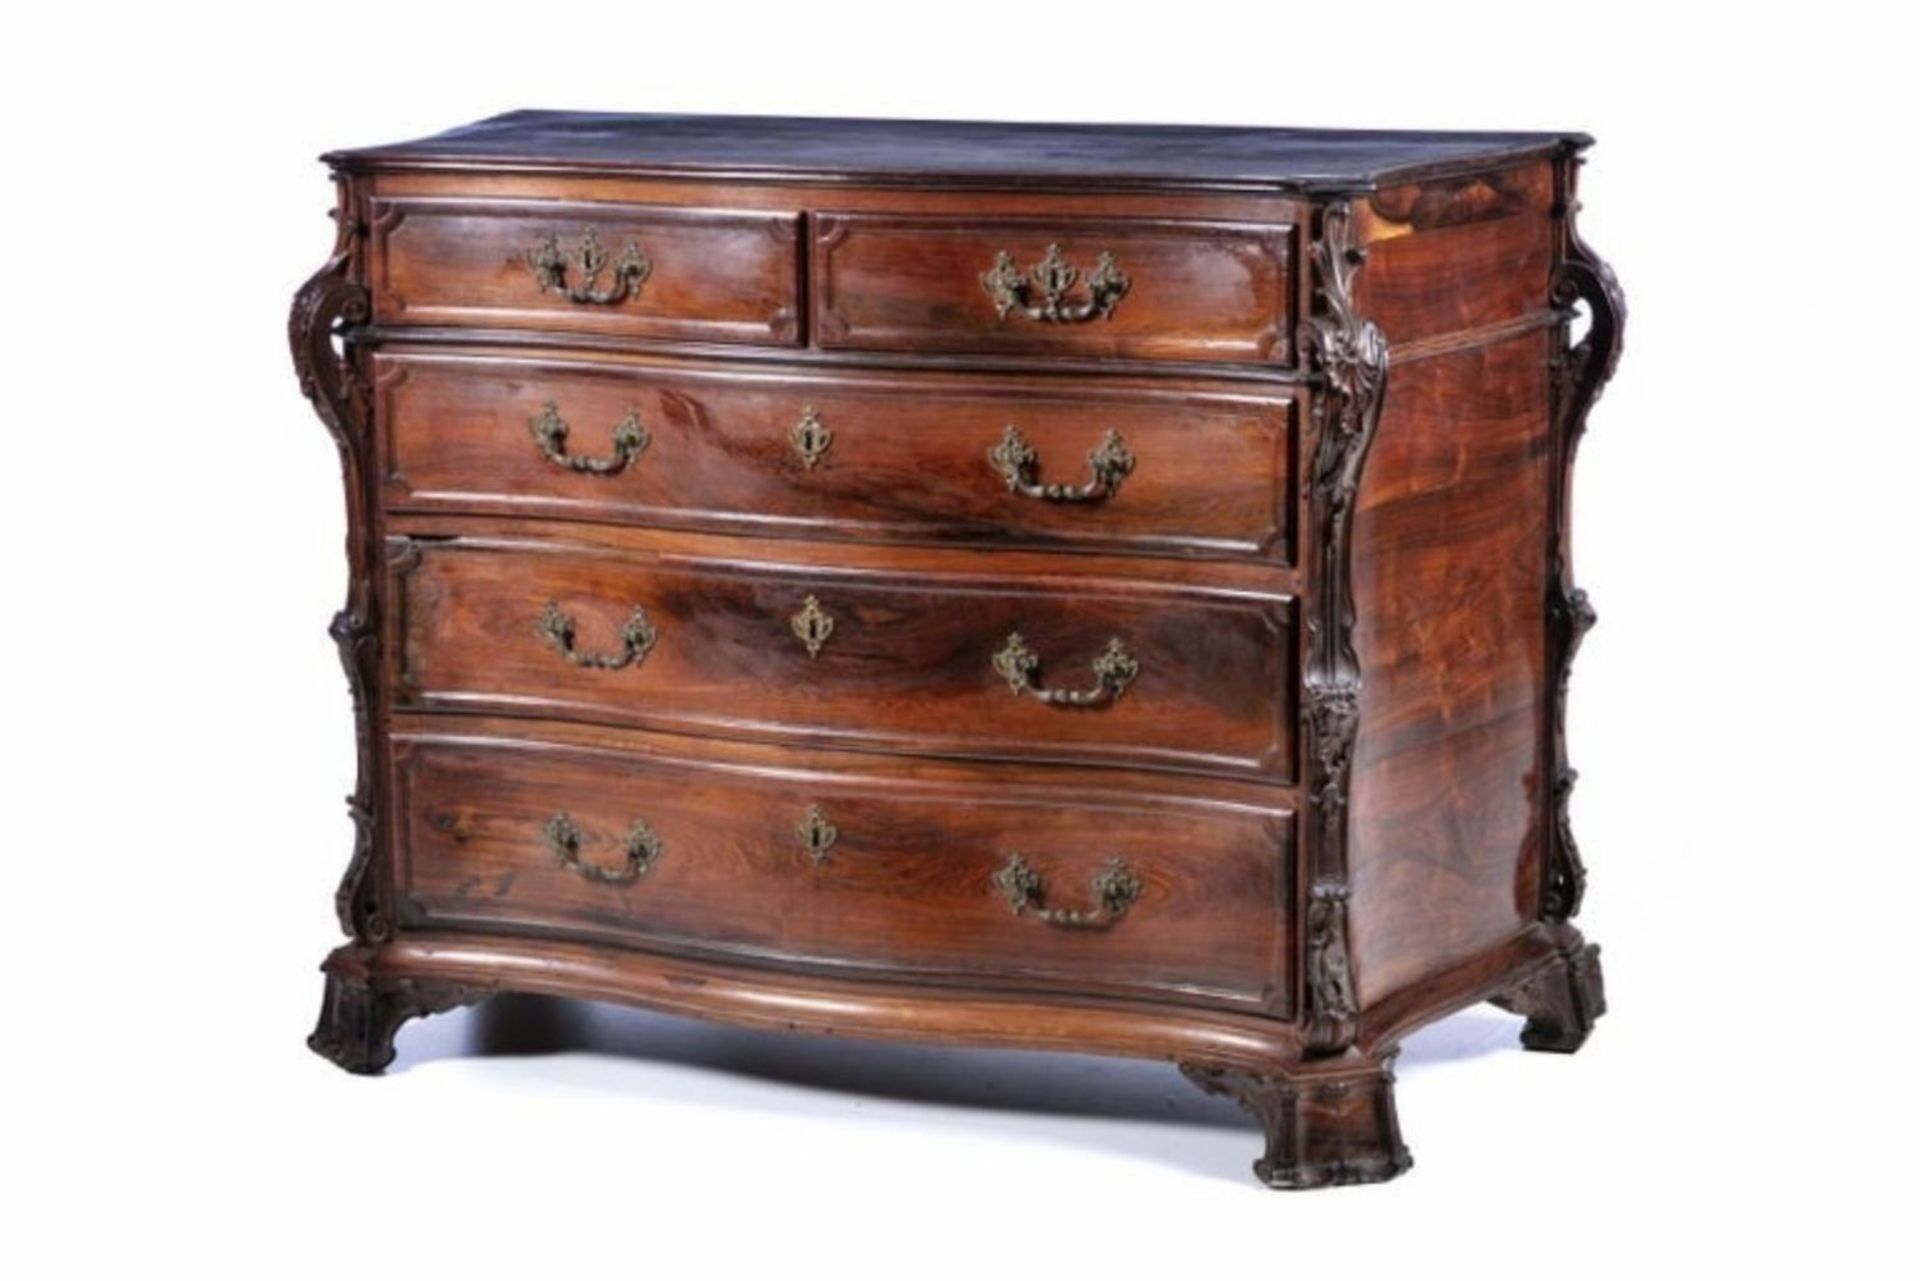 Important Portuguese Colonial Jorge I Chest of Drawers in solid Brazilian Rosewood, Portuguese work  - Image 2 of 3